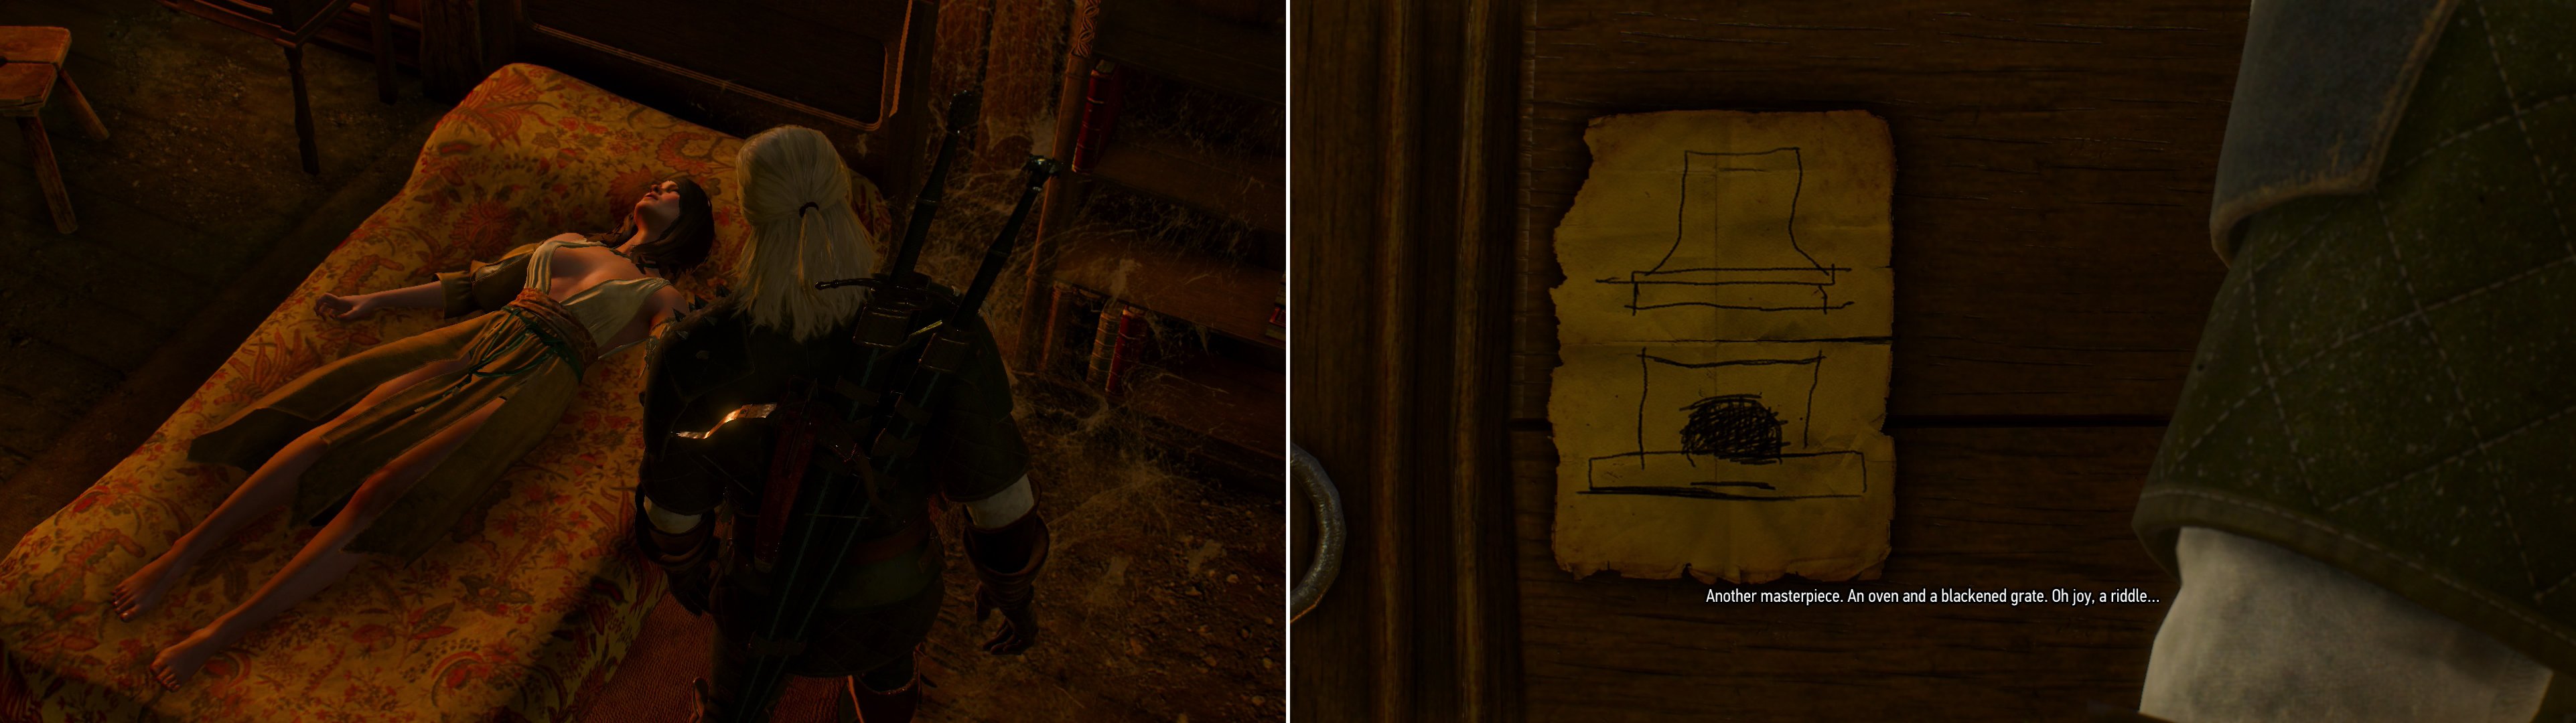 In the haunted house you'll fine Corinne, fitfully sleeping and clearly under the power of some malignant force (left). Follow the clues in the house to locate the source of the problem (right).